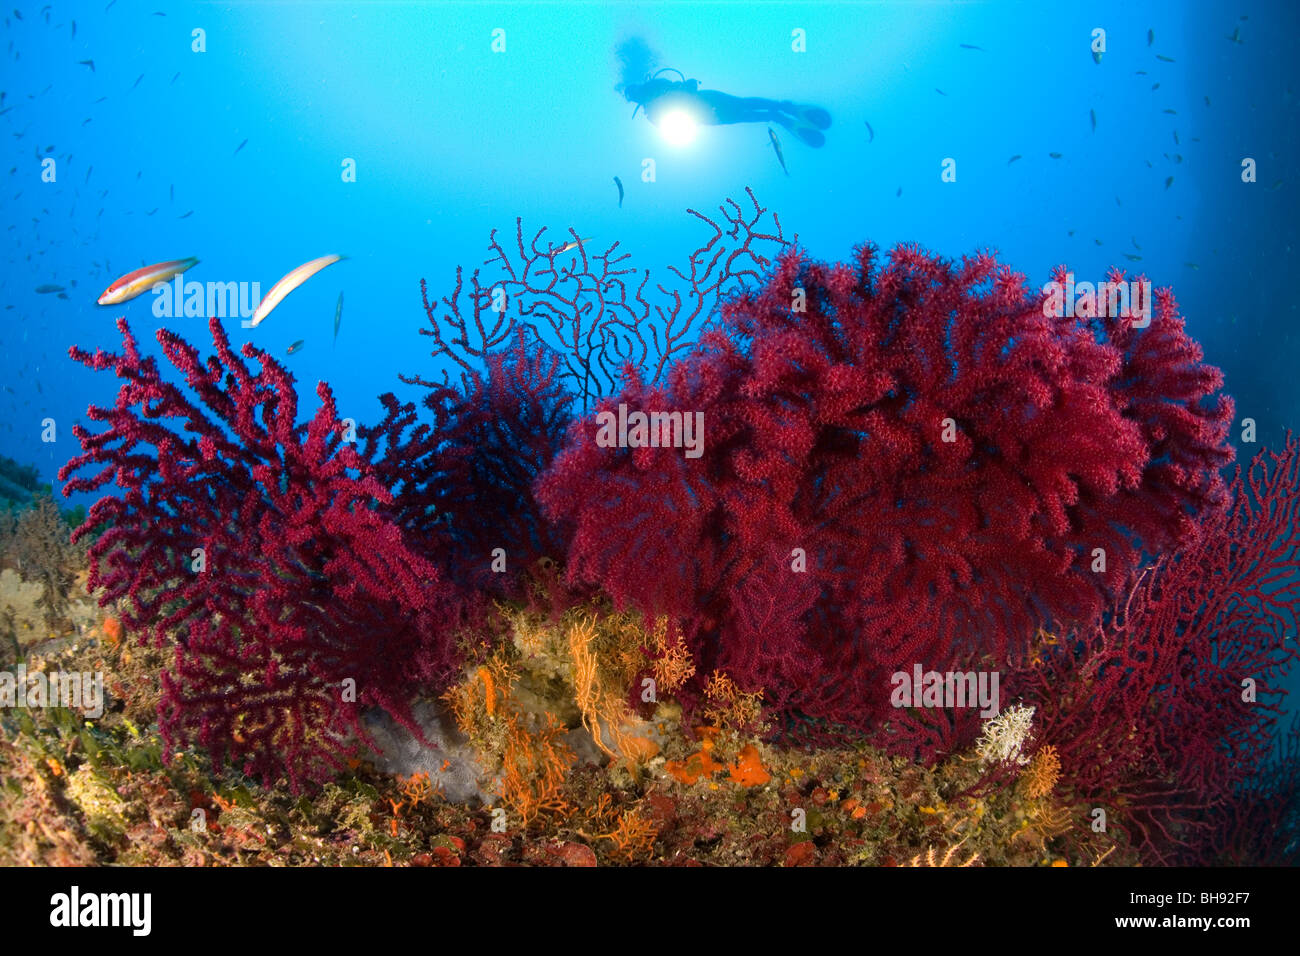 Red variable Gorgonian and Scuba Diver, Paramuricea clavata, Giglio Island, Mediterranean Sea, Italy Stock Photo